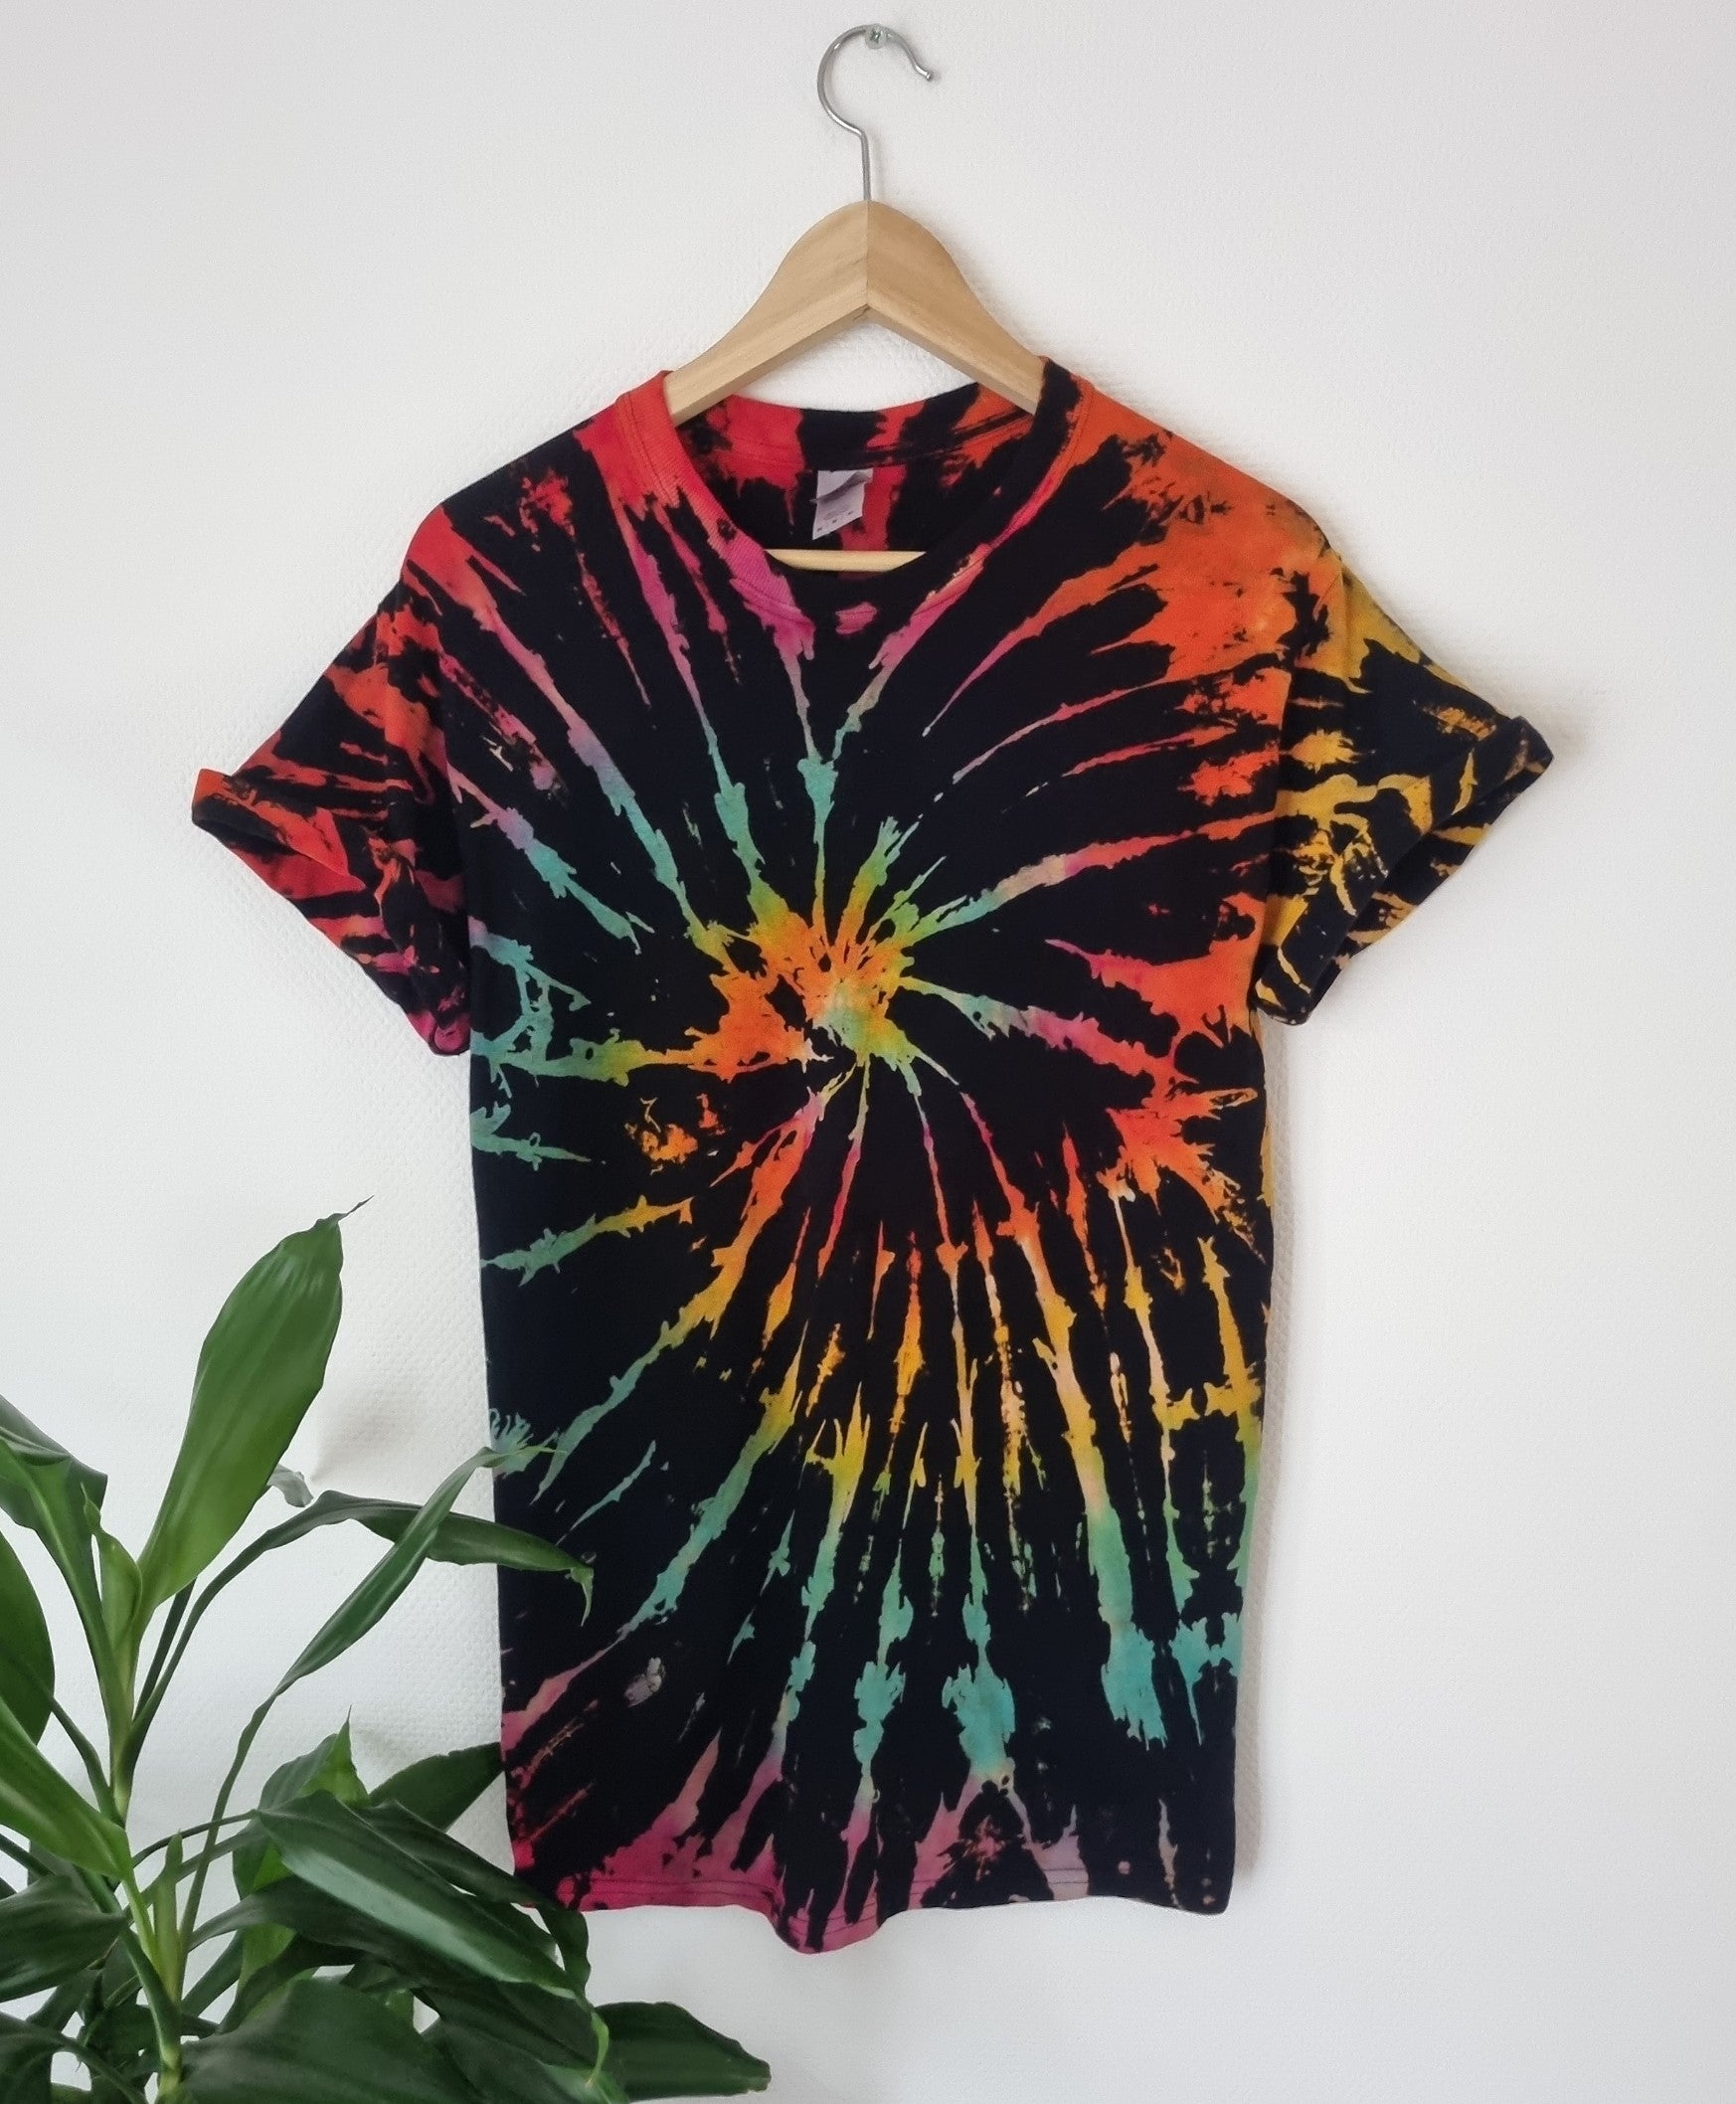 Tie Dye Designs: Making A Black Heart and Rainbow Tie Dye Shirt With Black  Accents 